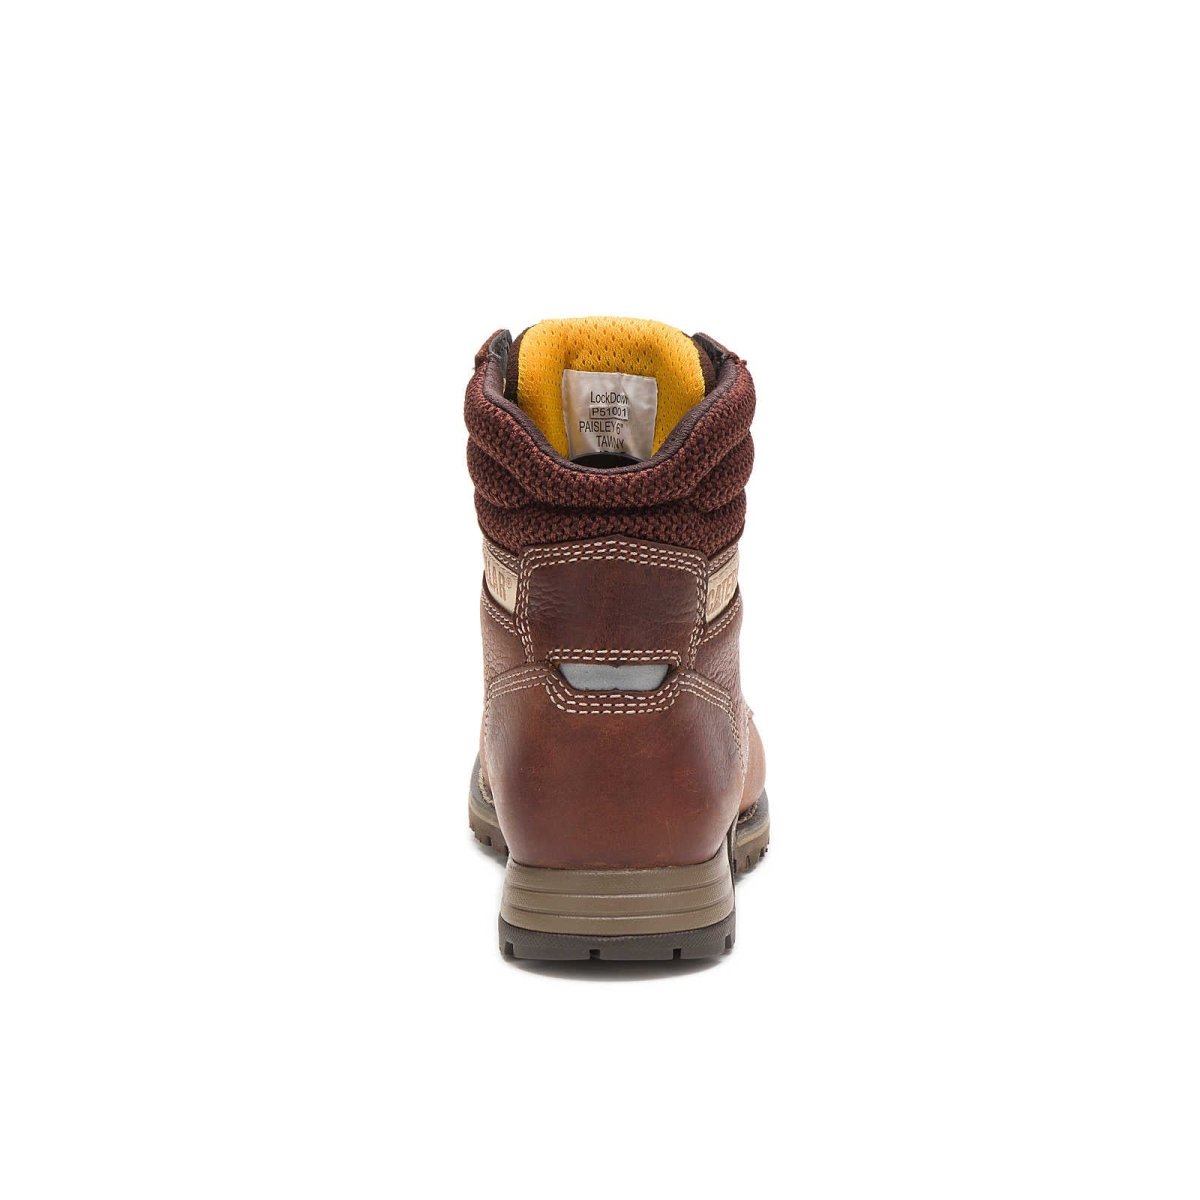 CATERPILLAR PAISLEY 6" WOME'S WORK BOOT (P51001) IN TAWNY - TLW Shoes